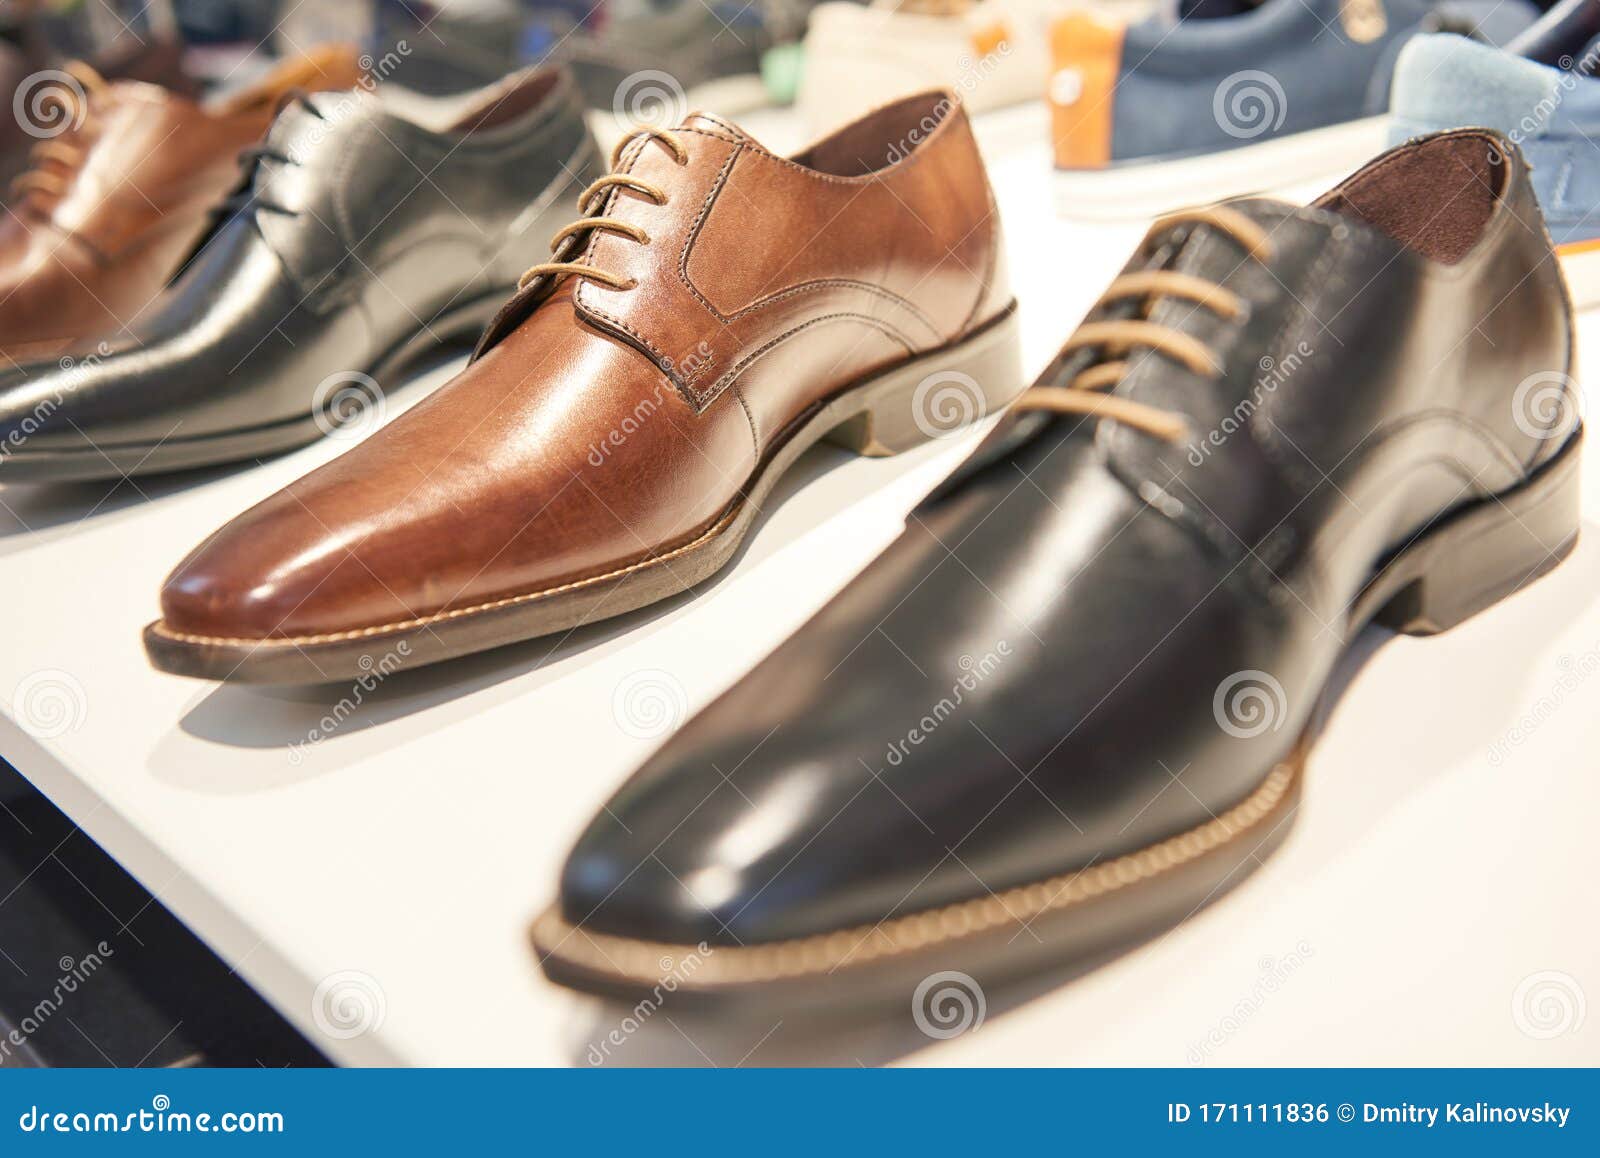 discount formal shoes